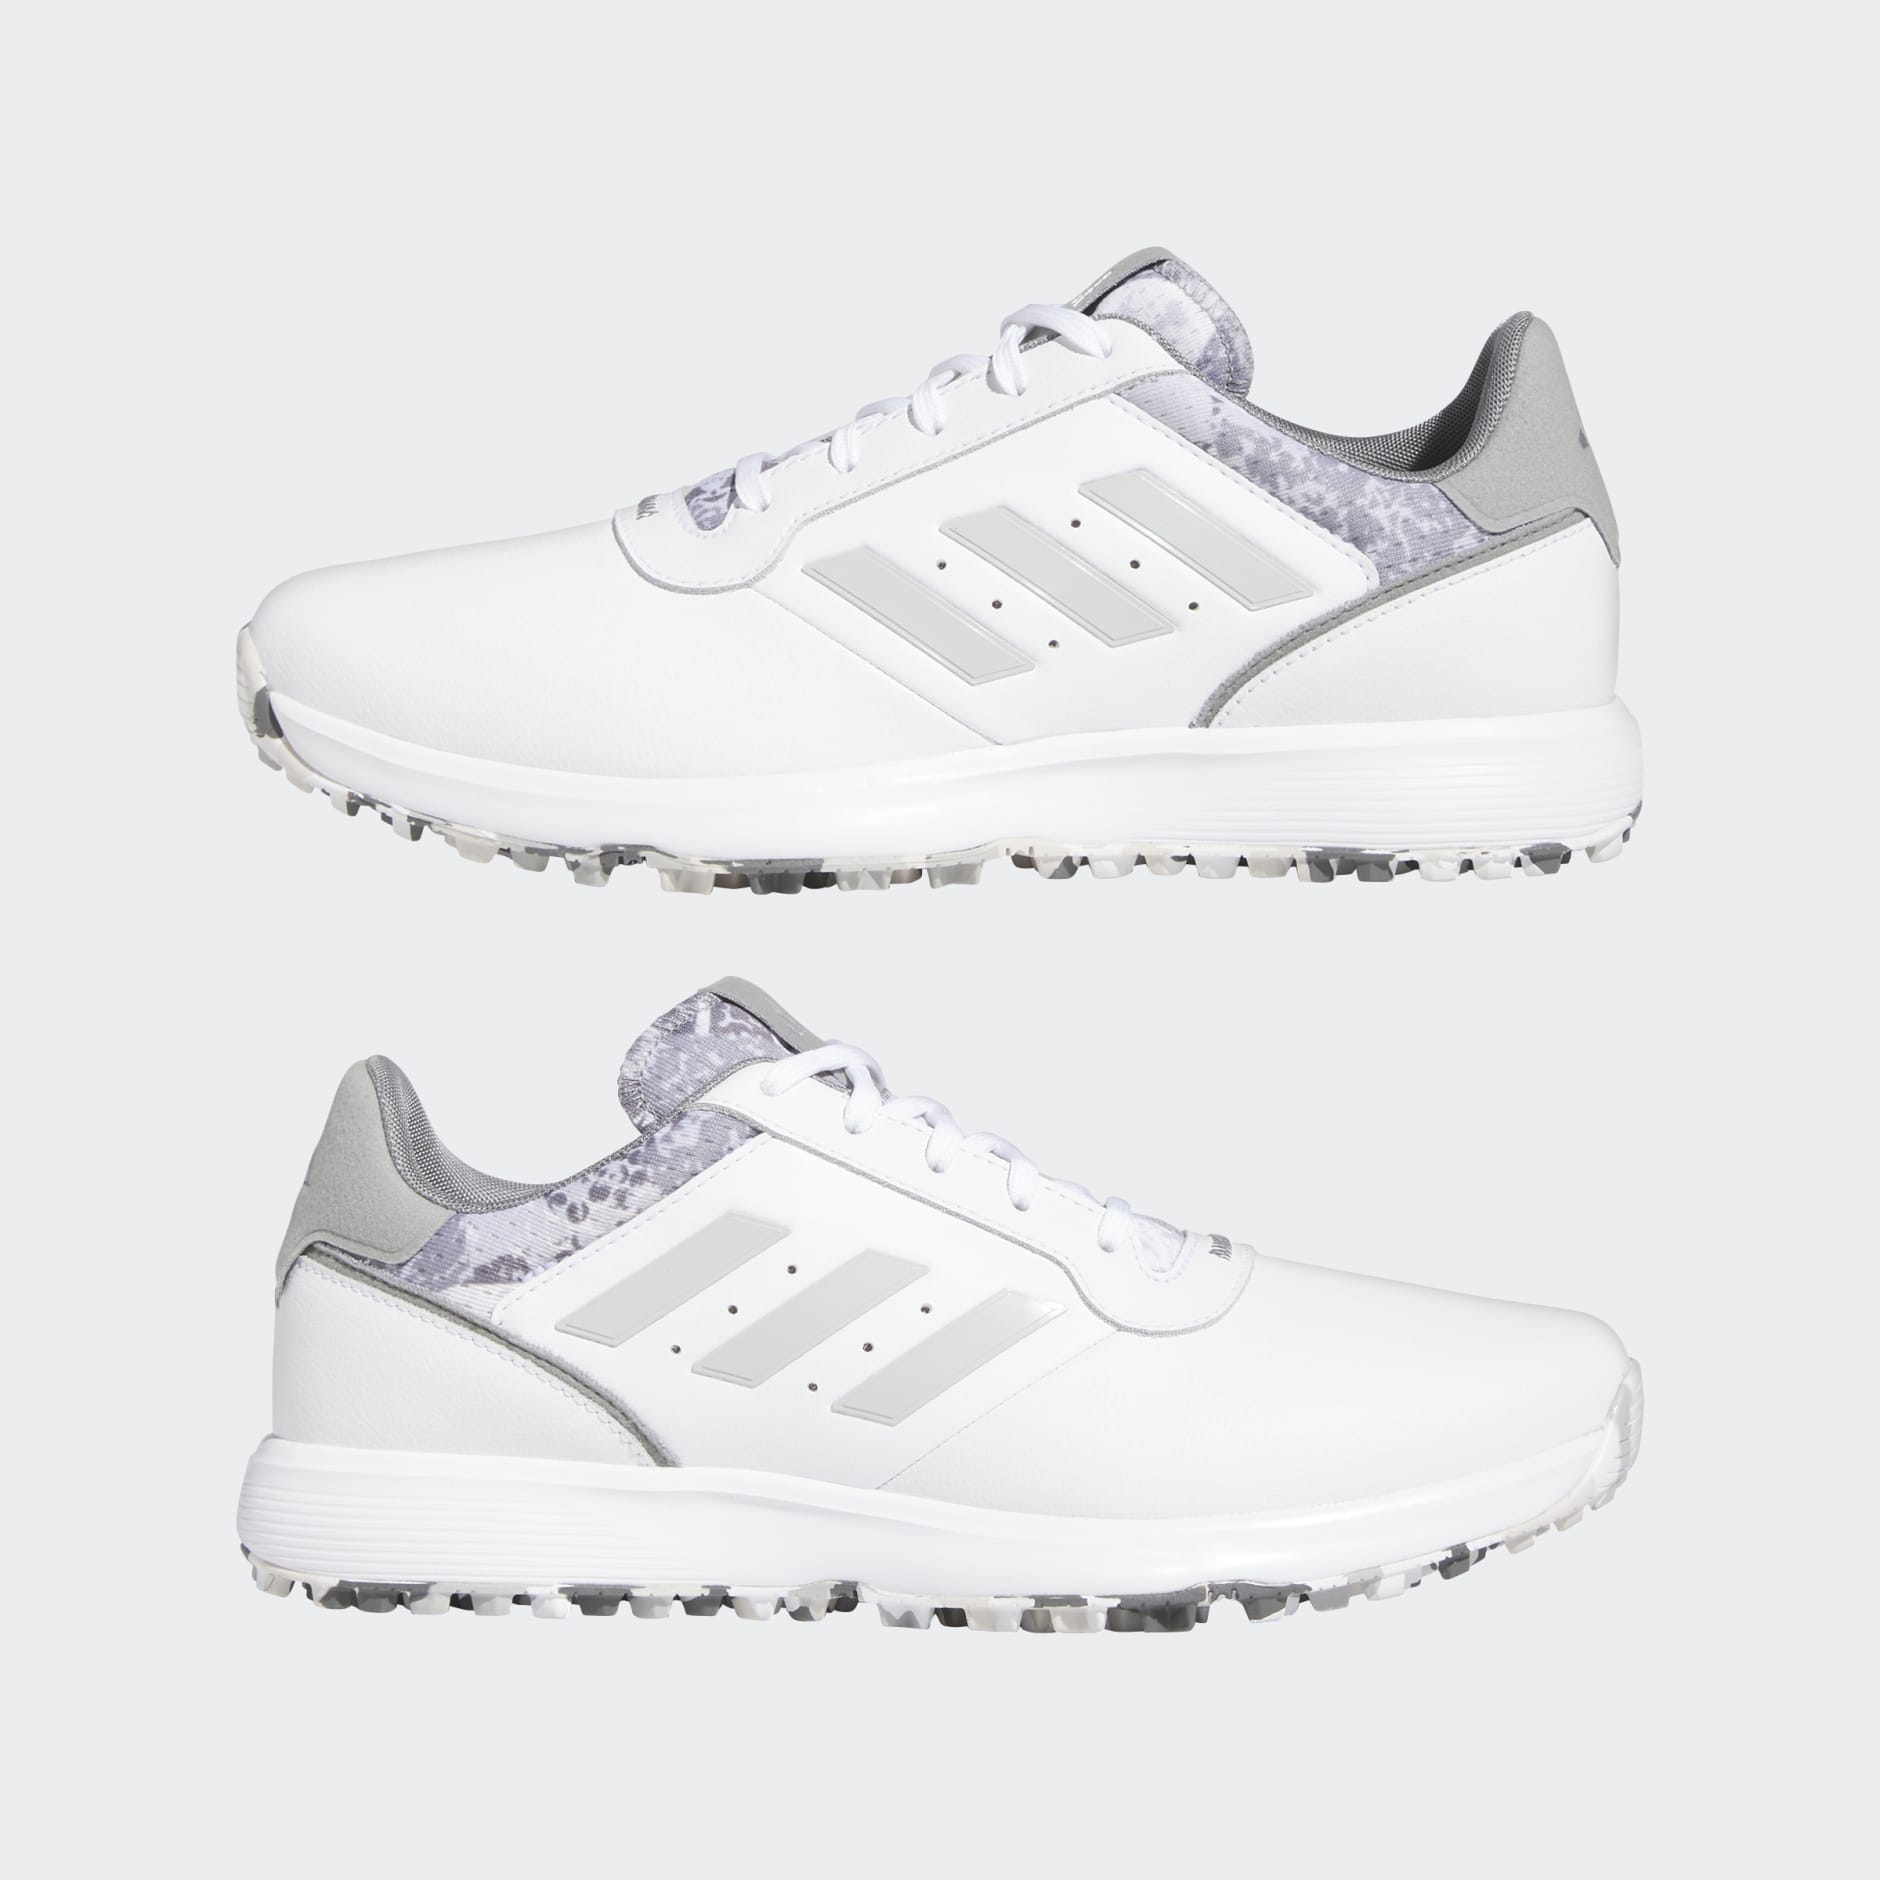 Shoes - S2G SL Golf Shoes - White | adidas South Africa